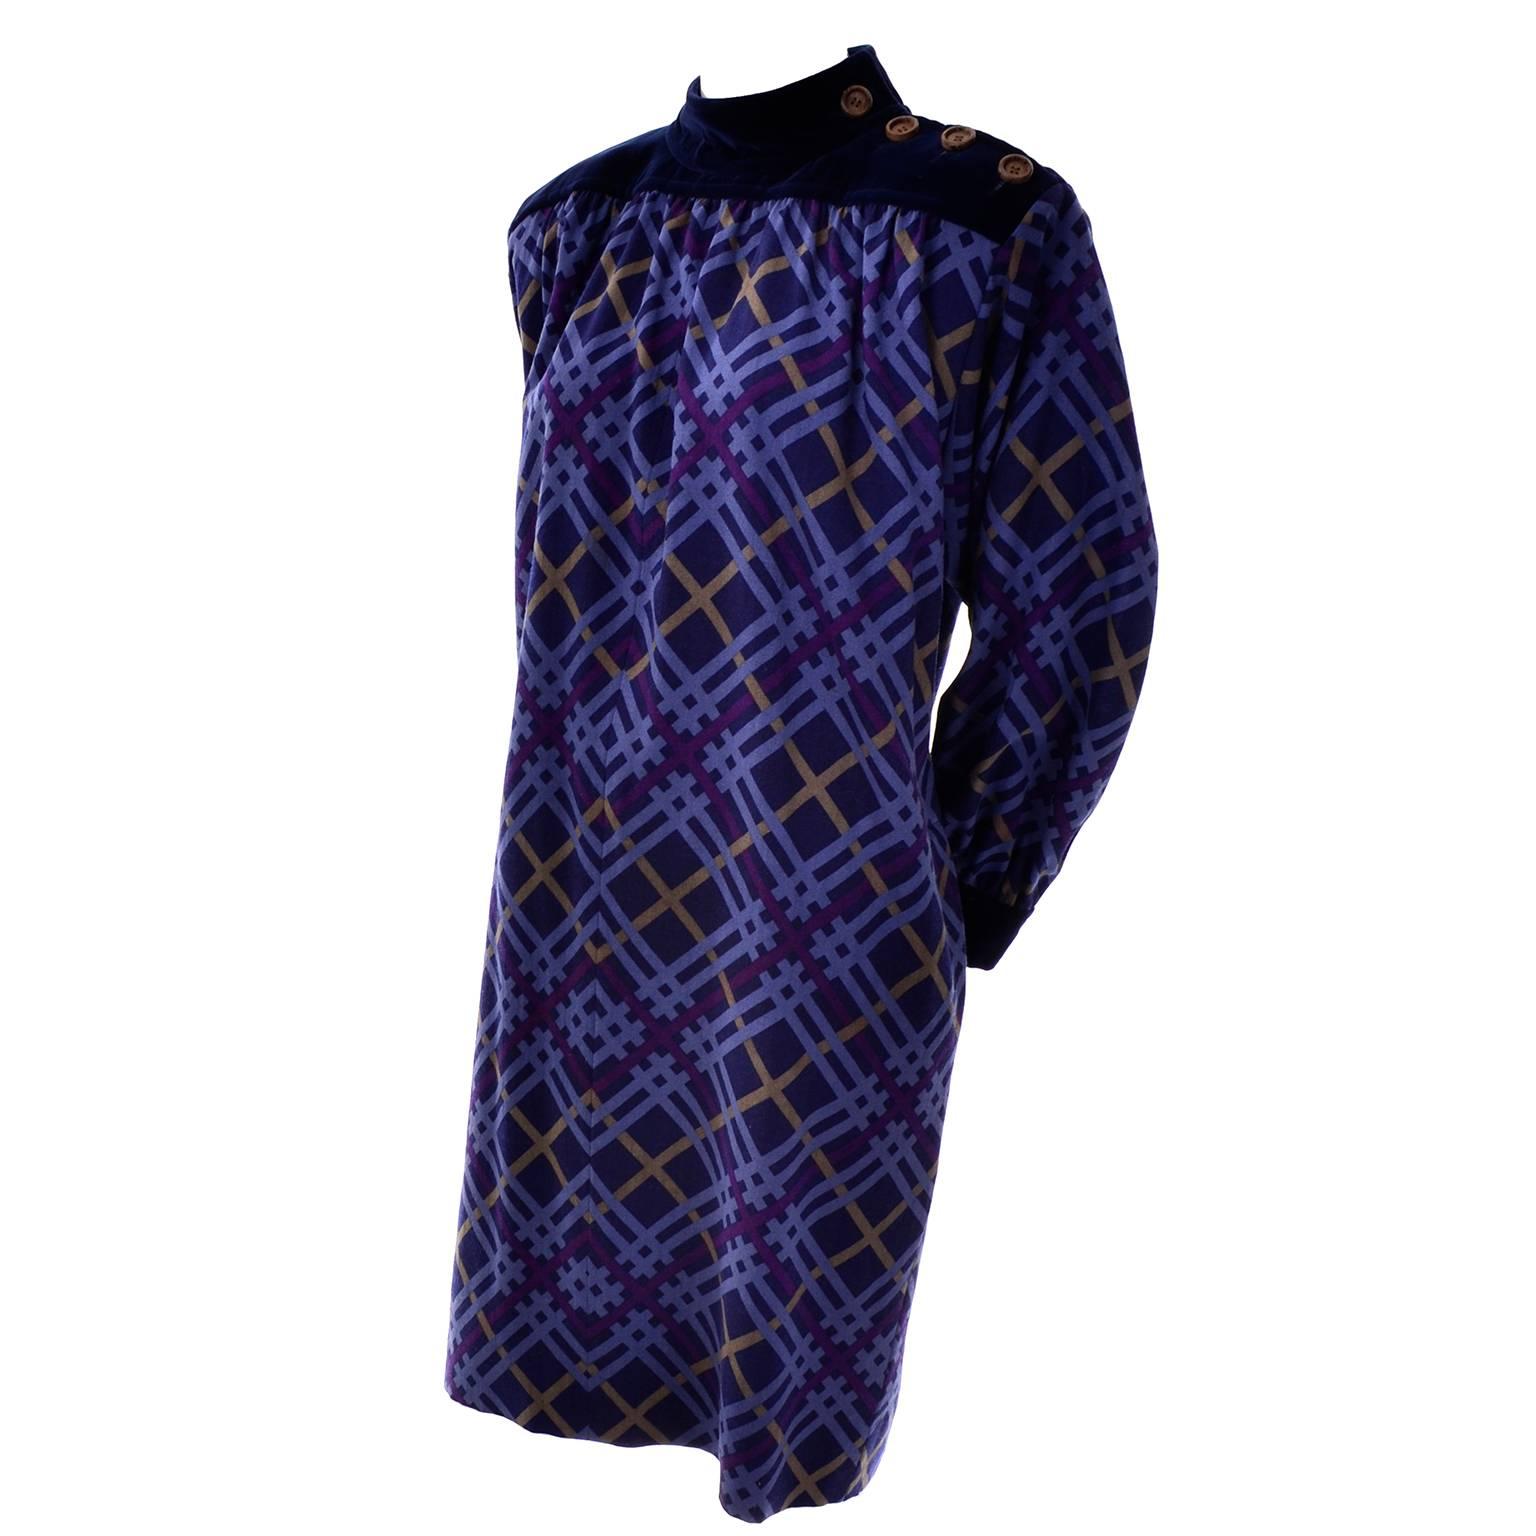 This vintage YSL dress was designed by Yves Saint Laurent in the late 1970's. The dress is wool with a purple, blue and mustard plaid on a dark blue background. The mock turtleneck and shoulders are blue velvet and there are 4 wood buttons on the